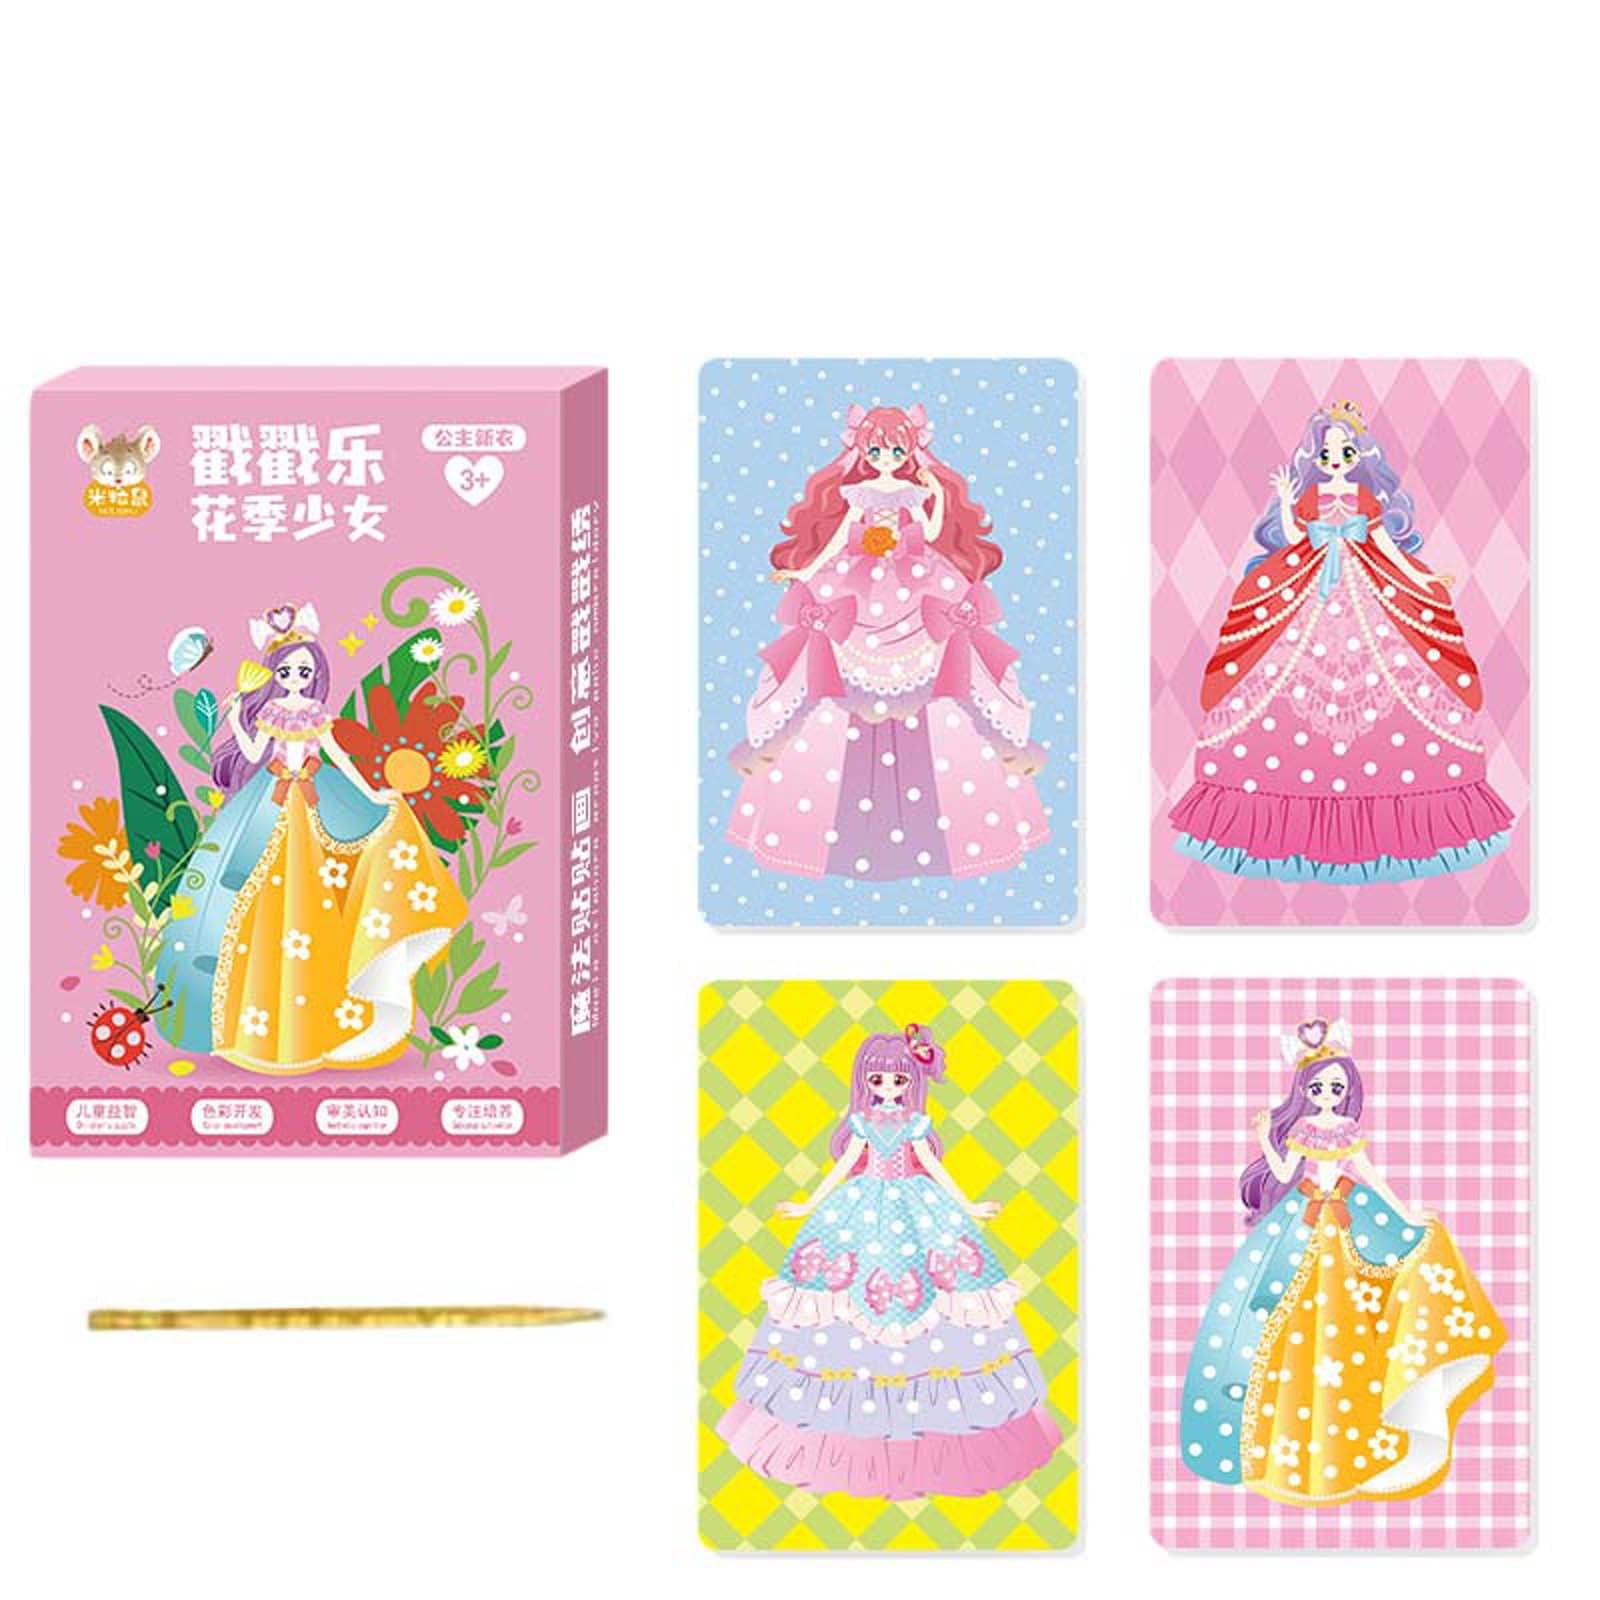 Artcraft Painting Drawing Book for Girls Fairy Poke Art Puzzle